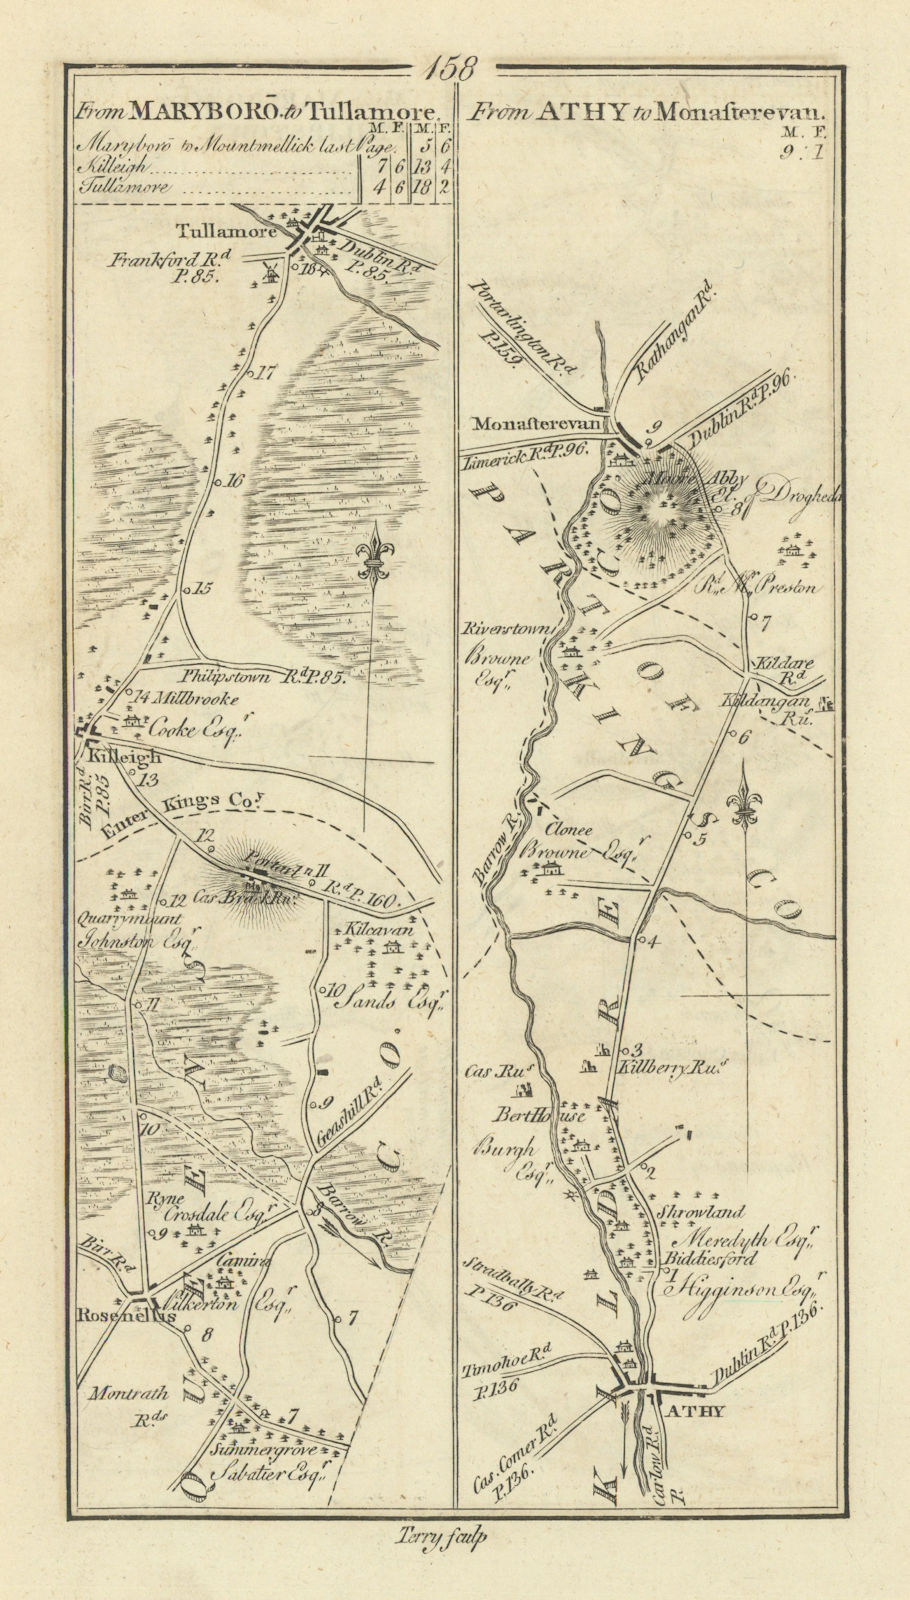 Associate Product #158 Maryboro to Tullamore. Athy to Monasterevin. TAYLOR/SKINNER 1778 old map